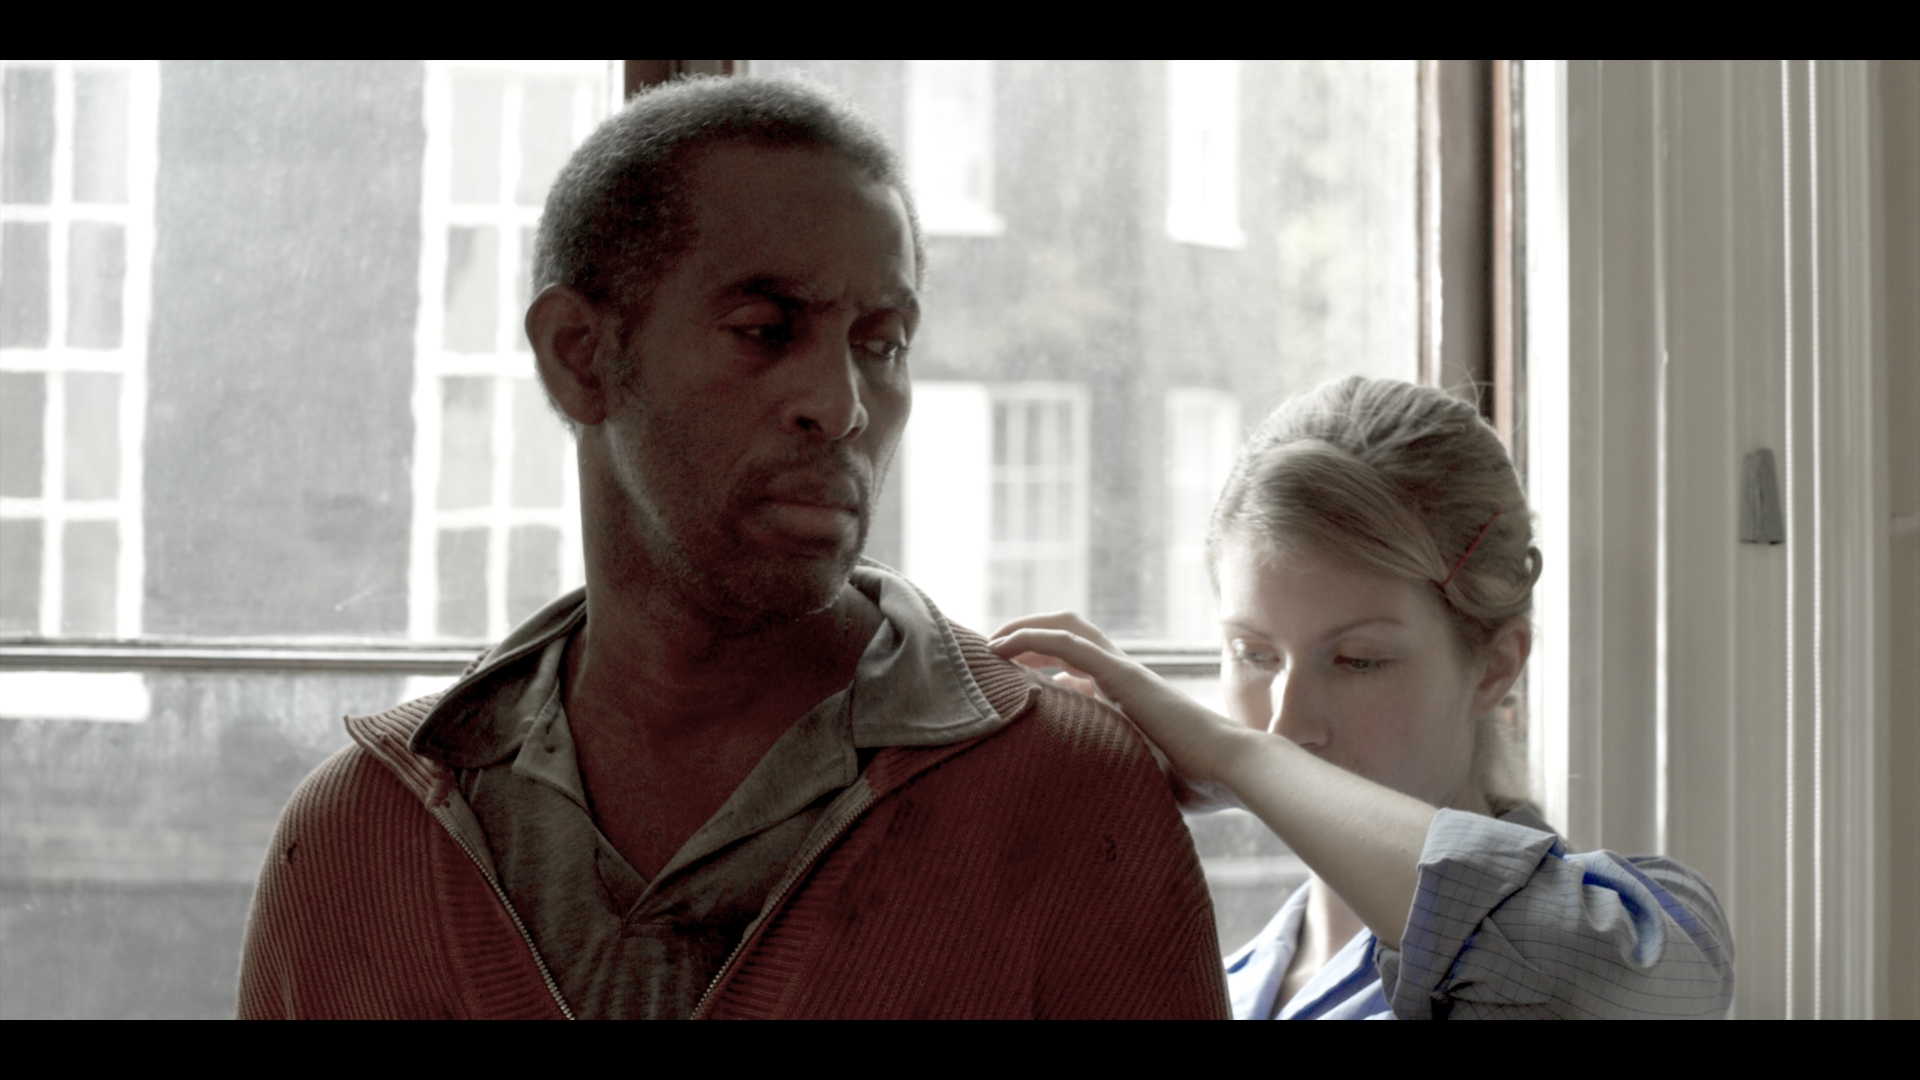 Production stills from Marty Unplugged - with Conrad Peters as Marty and Emma Stannard as his caring nurse.